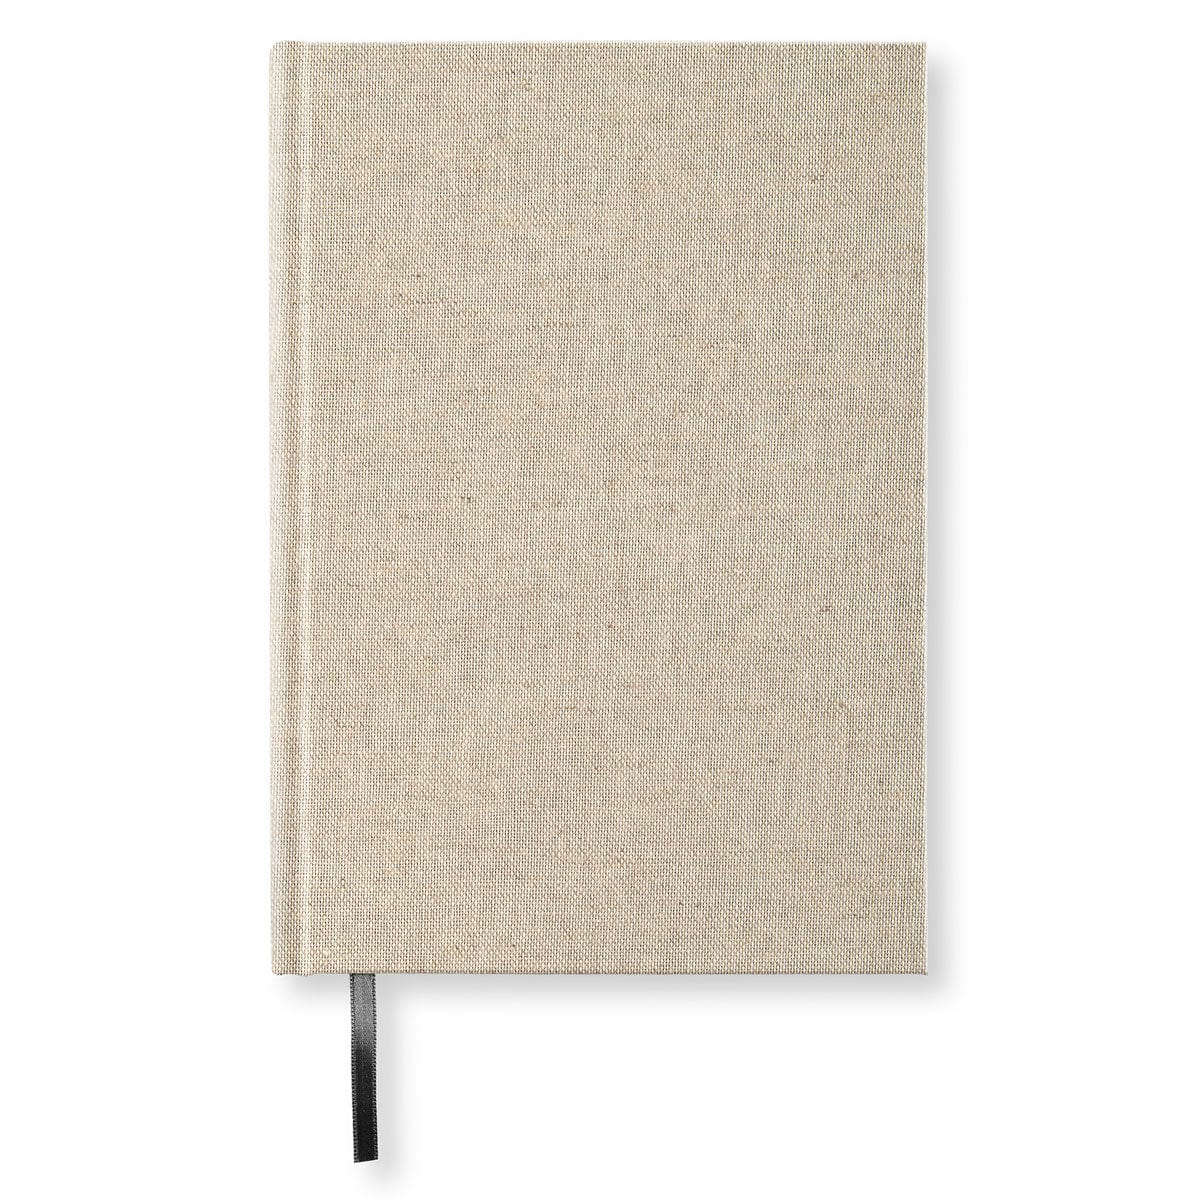 PaperStyle Paperstyle NOTEBOOK A5 128p. Plain Rough Linen